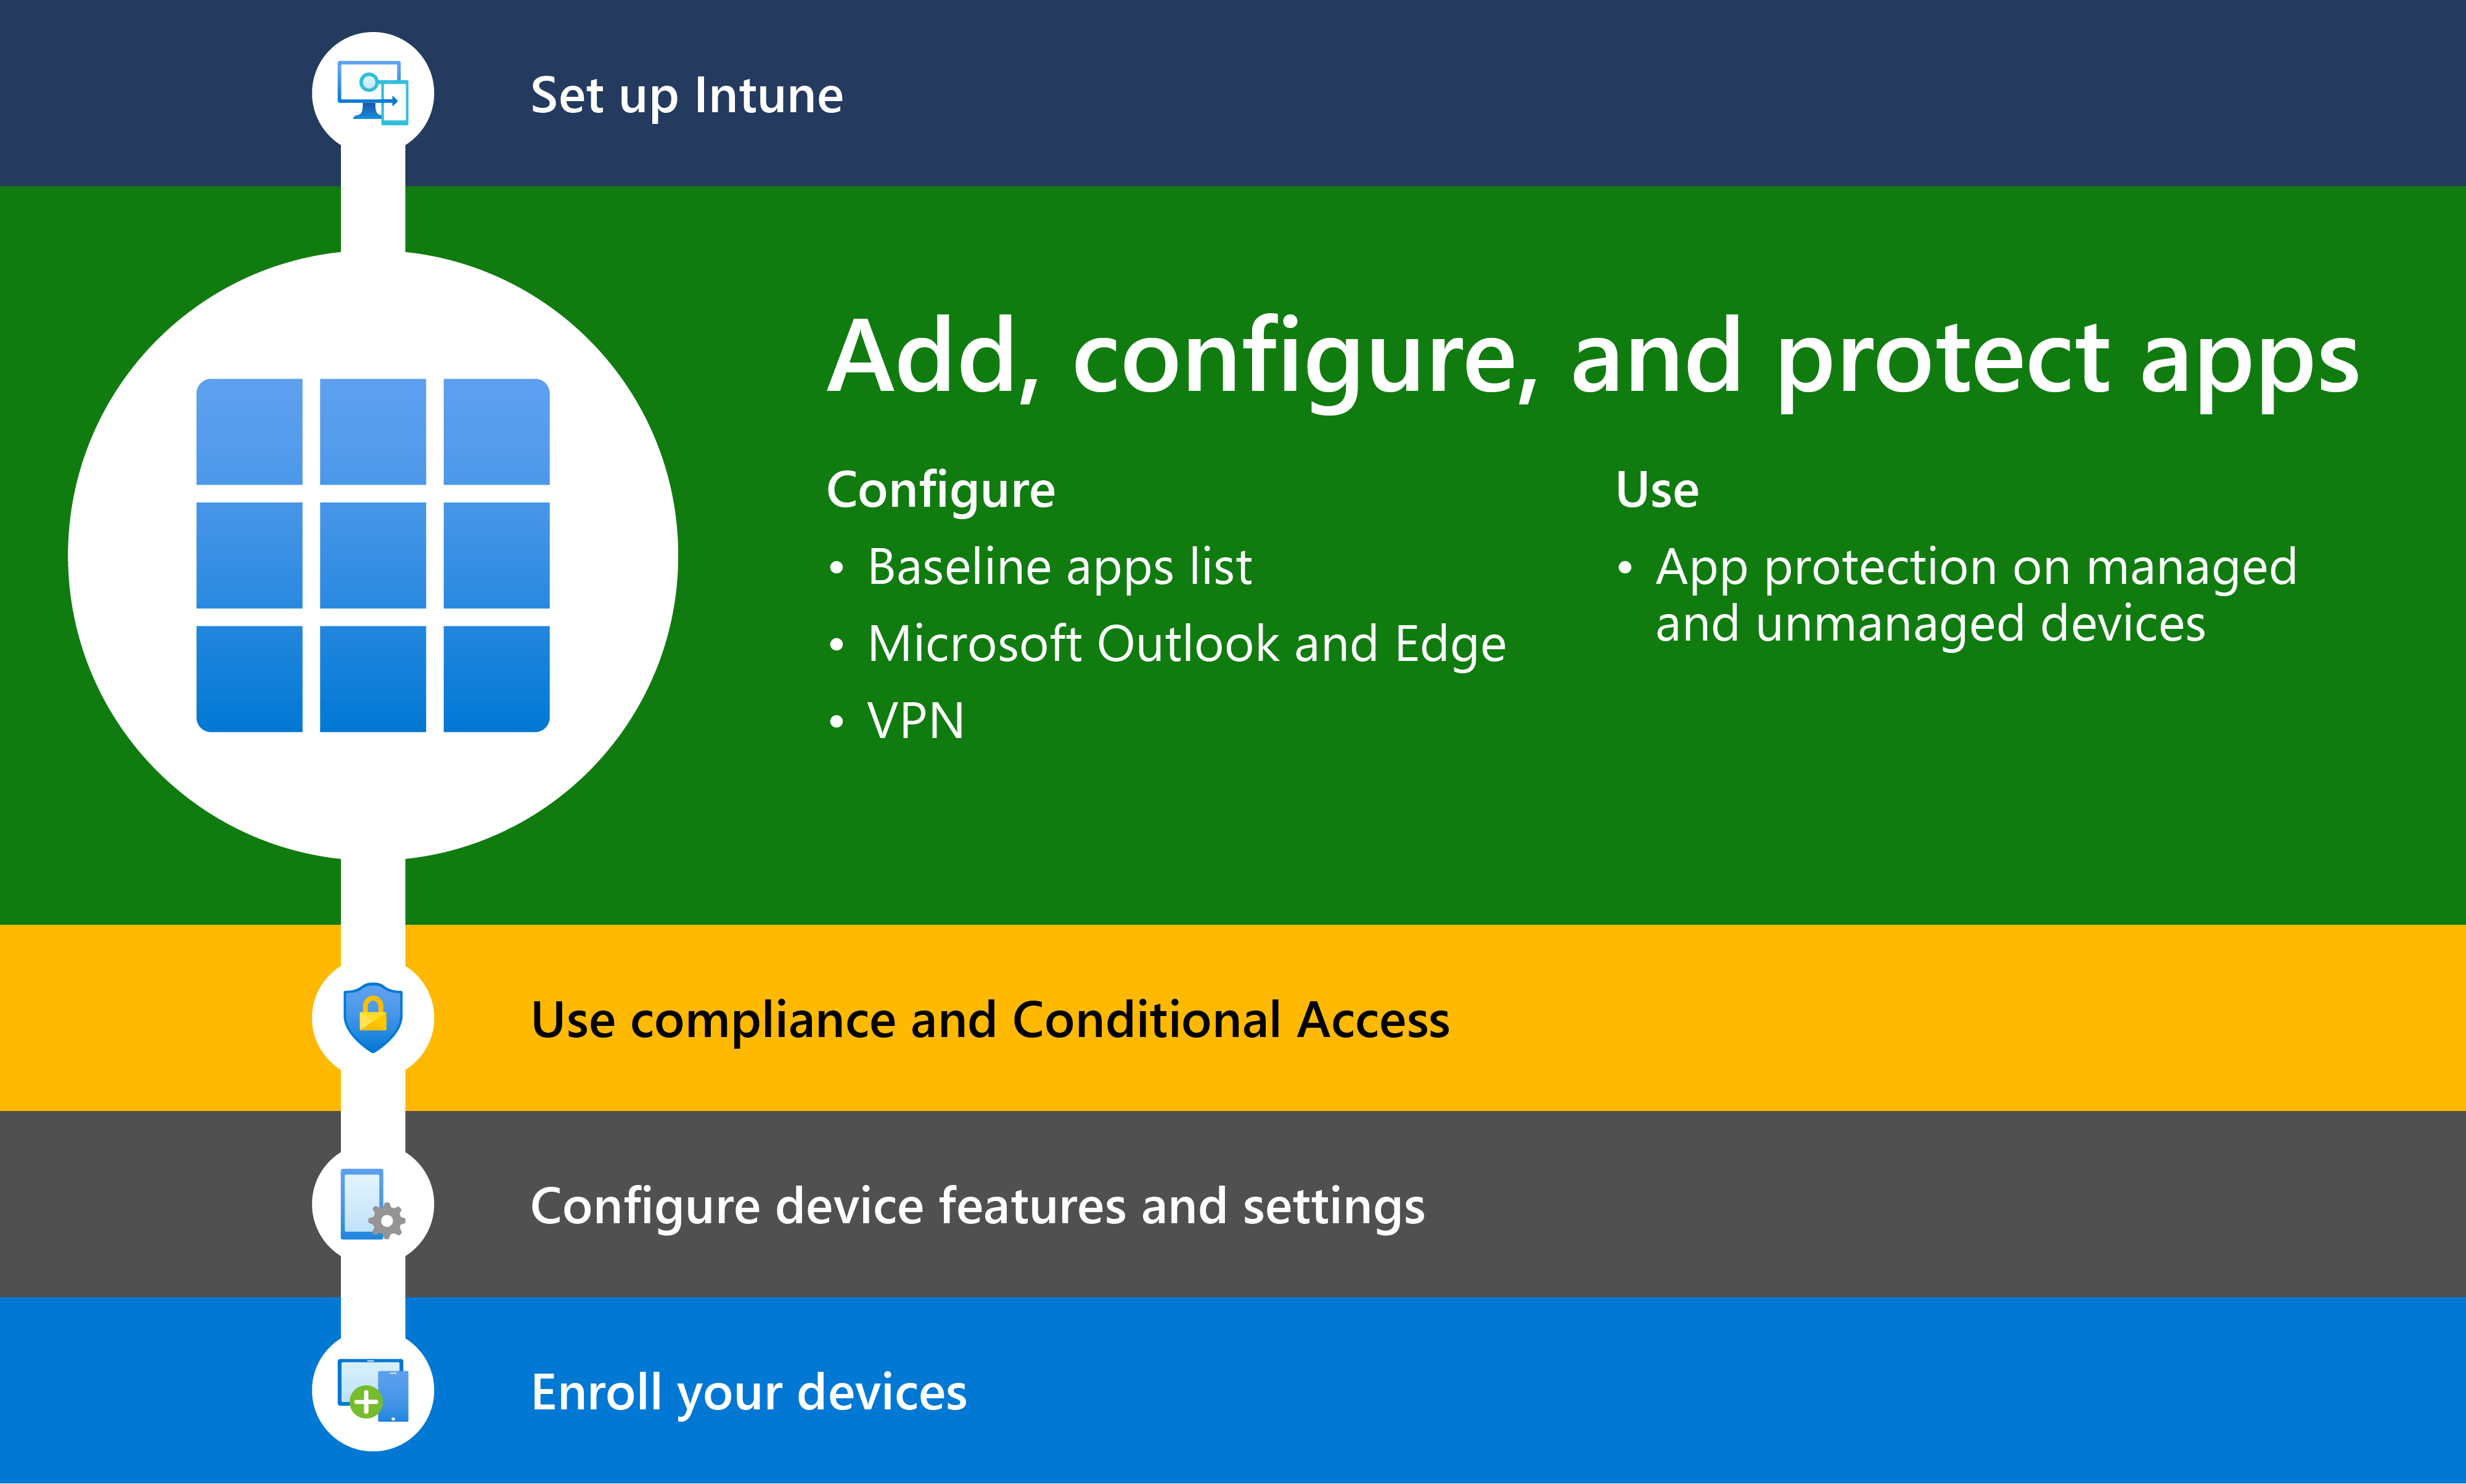 Diagram that shows getting started with Microsoft Intune with step 2, which is adding and protect apps using Microsoft Intune.